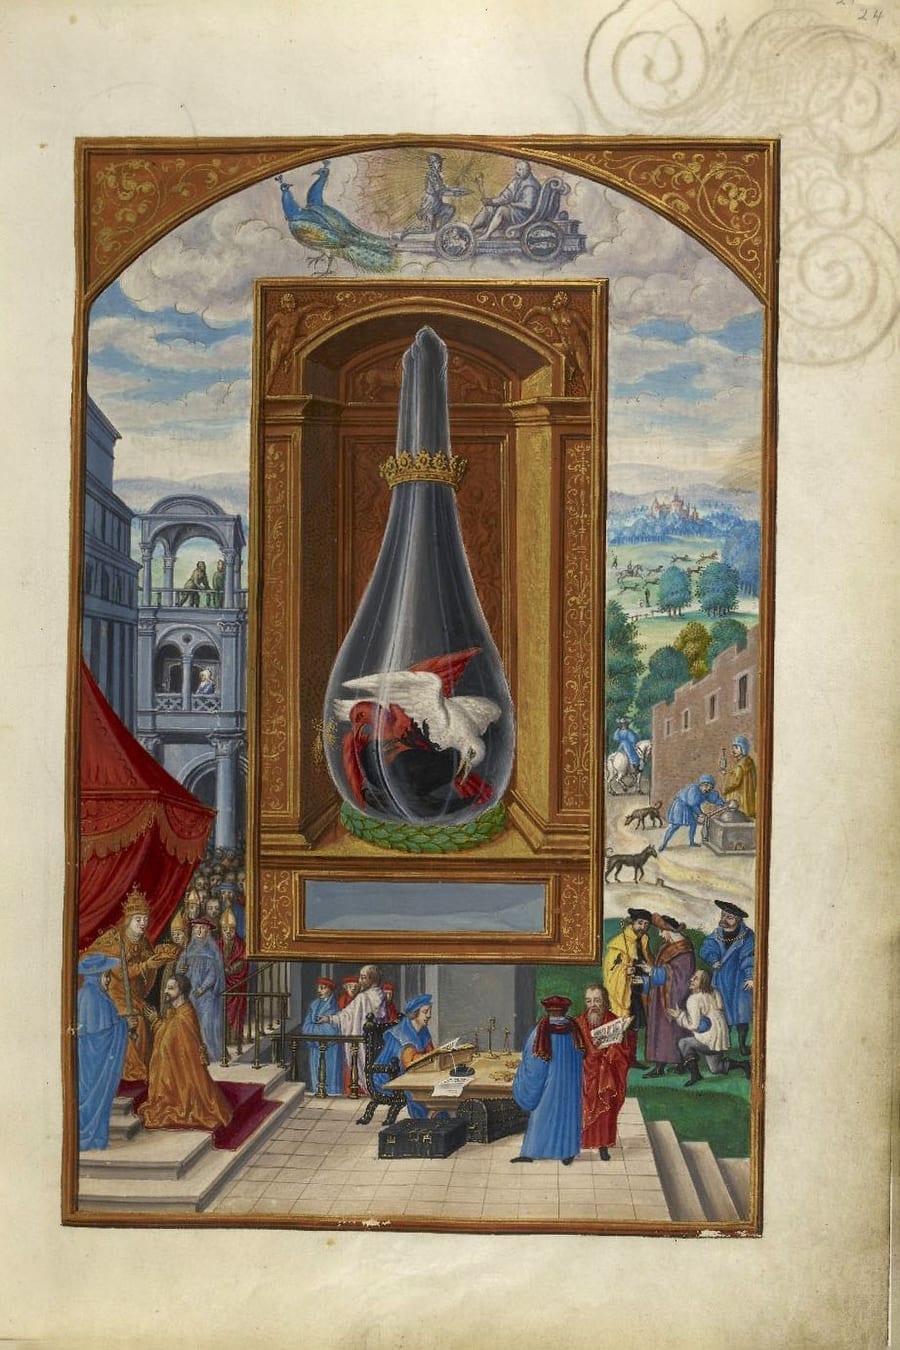 Illustration of three birds in a flask from the Alchemical manuscript Splendor Solis